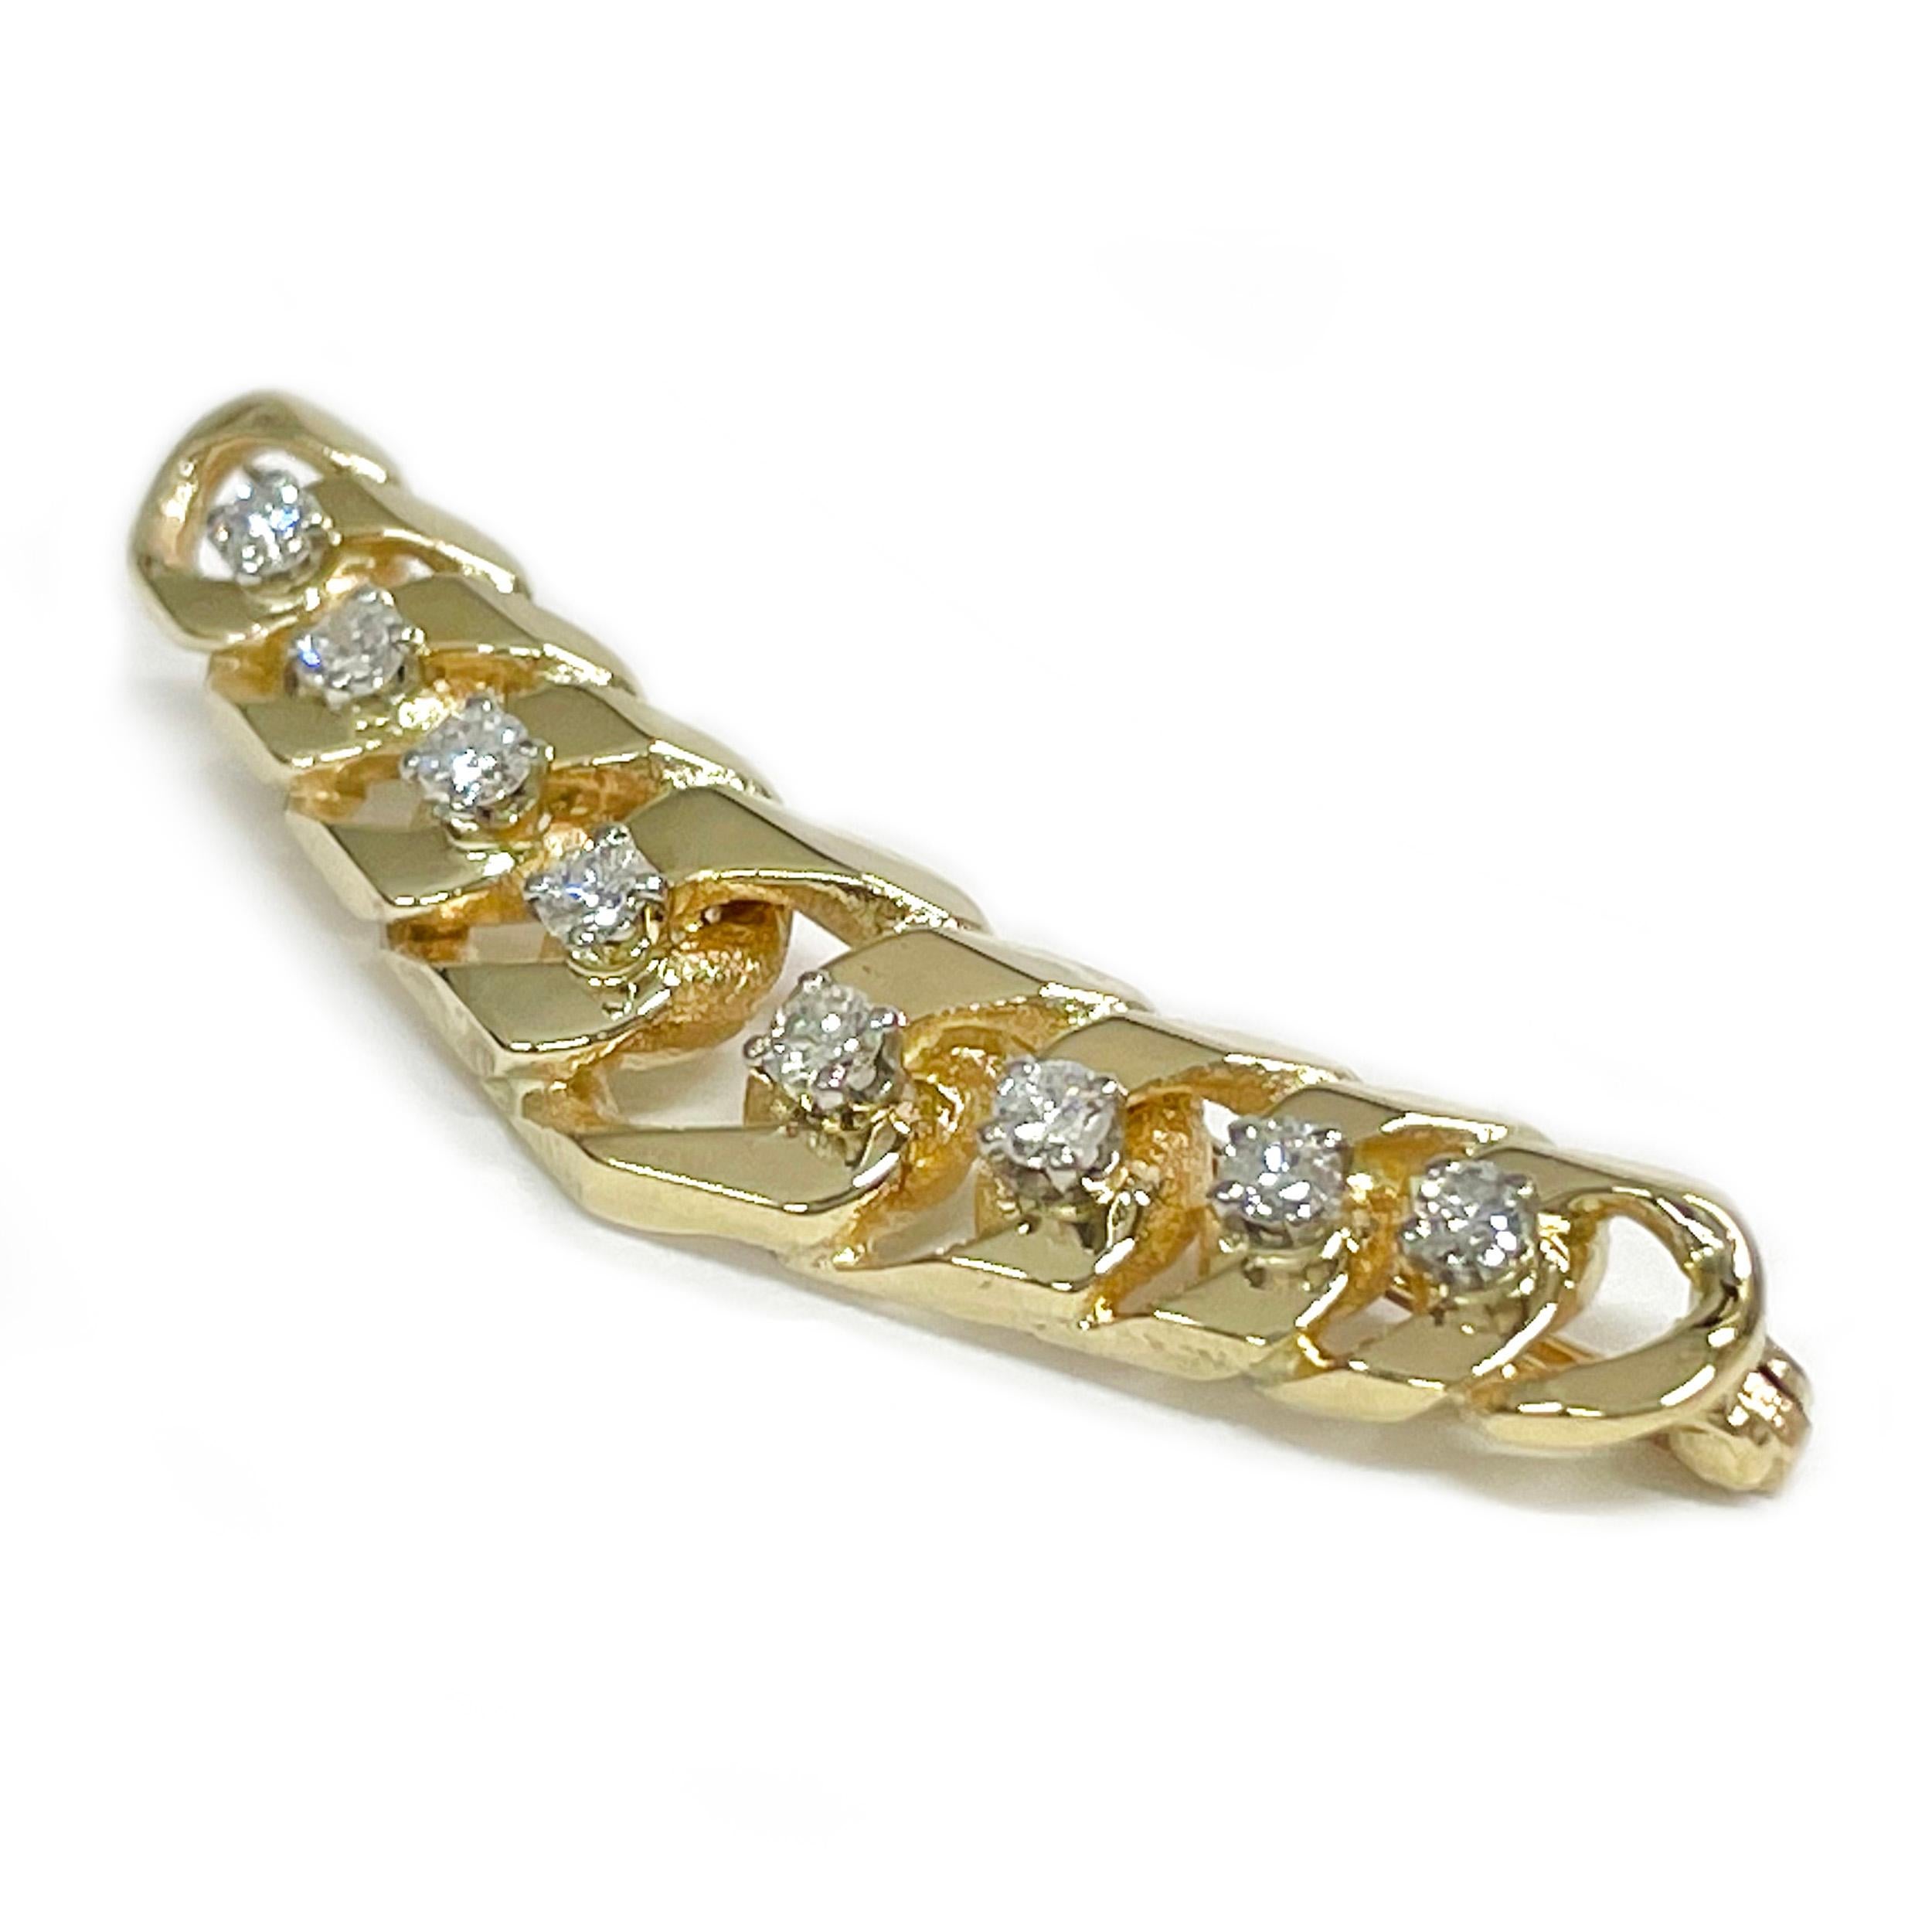 14 Karat Yellow Gold Diamond Curbed Link Diamond Brooch. The unique brooch features graduated curbed link chain base in a chevron shape with prong-set diamonds on top at the point where the links meet horizontally. There are eight SI1 in clarity